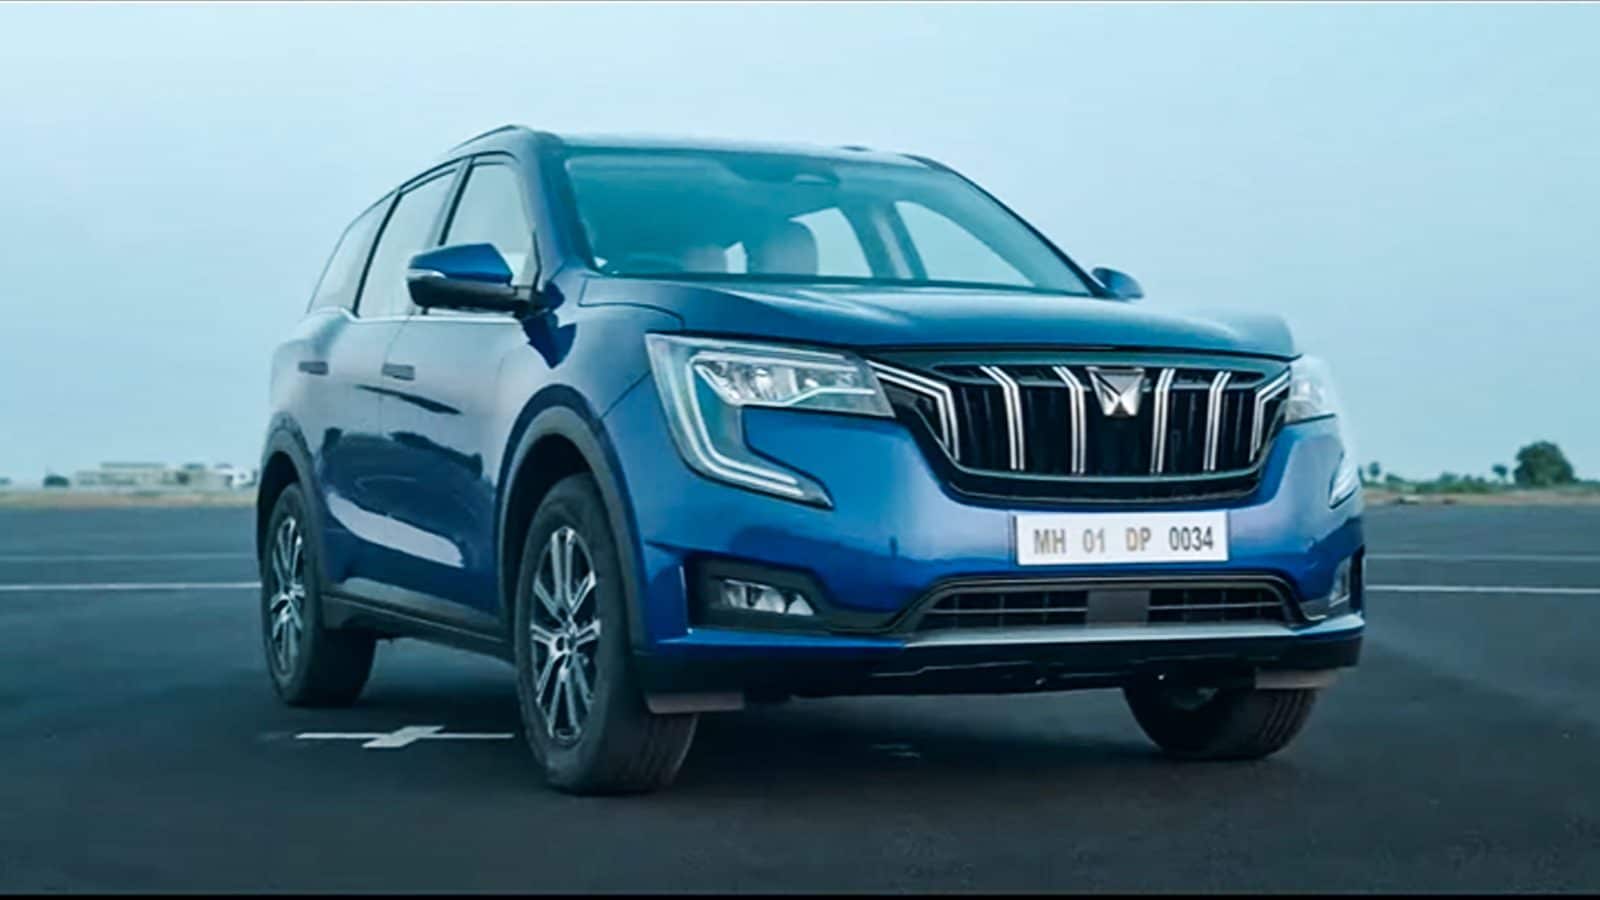 Mahindra XUV700 SUV Unveil LIVE Updates As it Happened